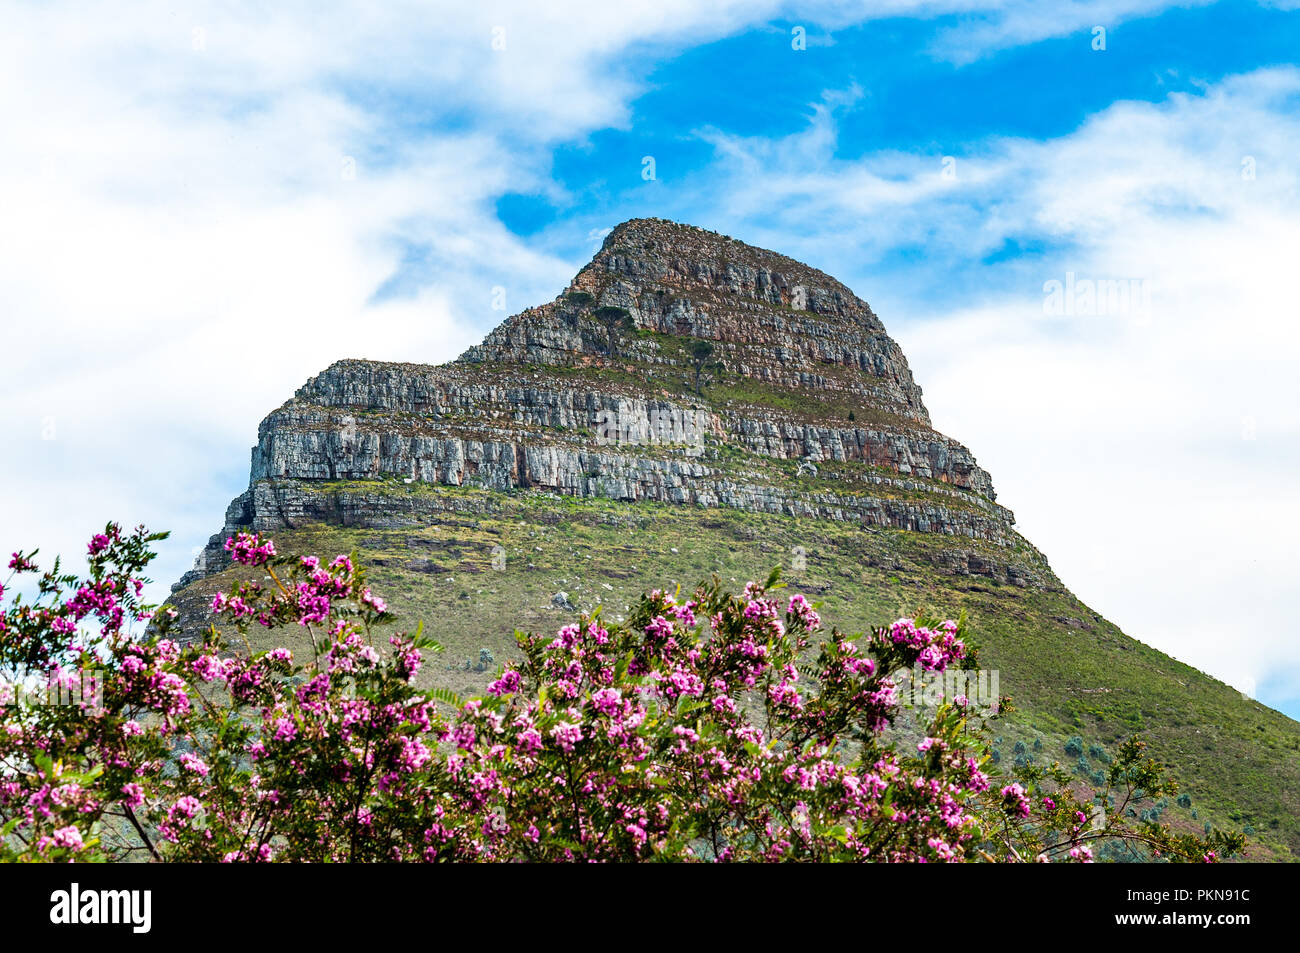 Signal Hill with pink flowers in the foreground in Cape Town, South Africa Stock Photo